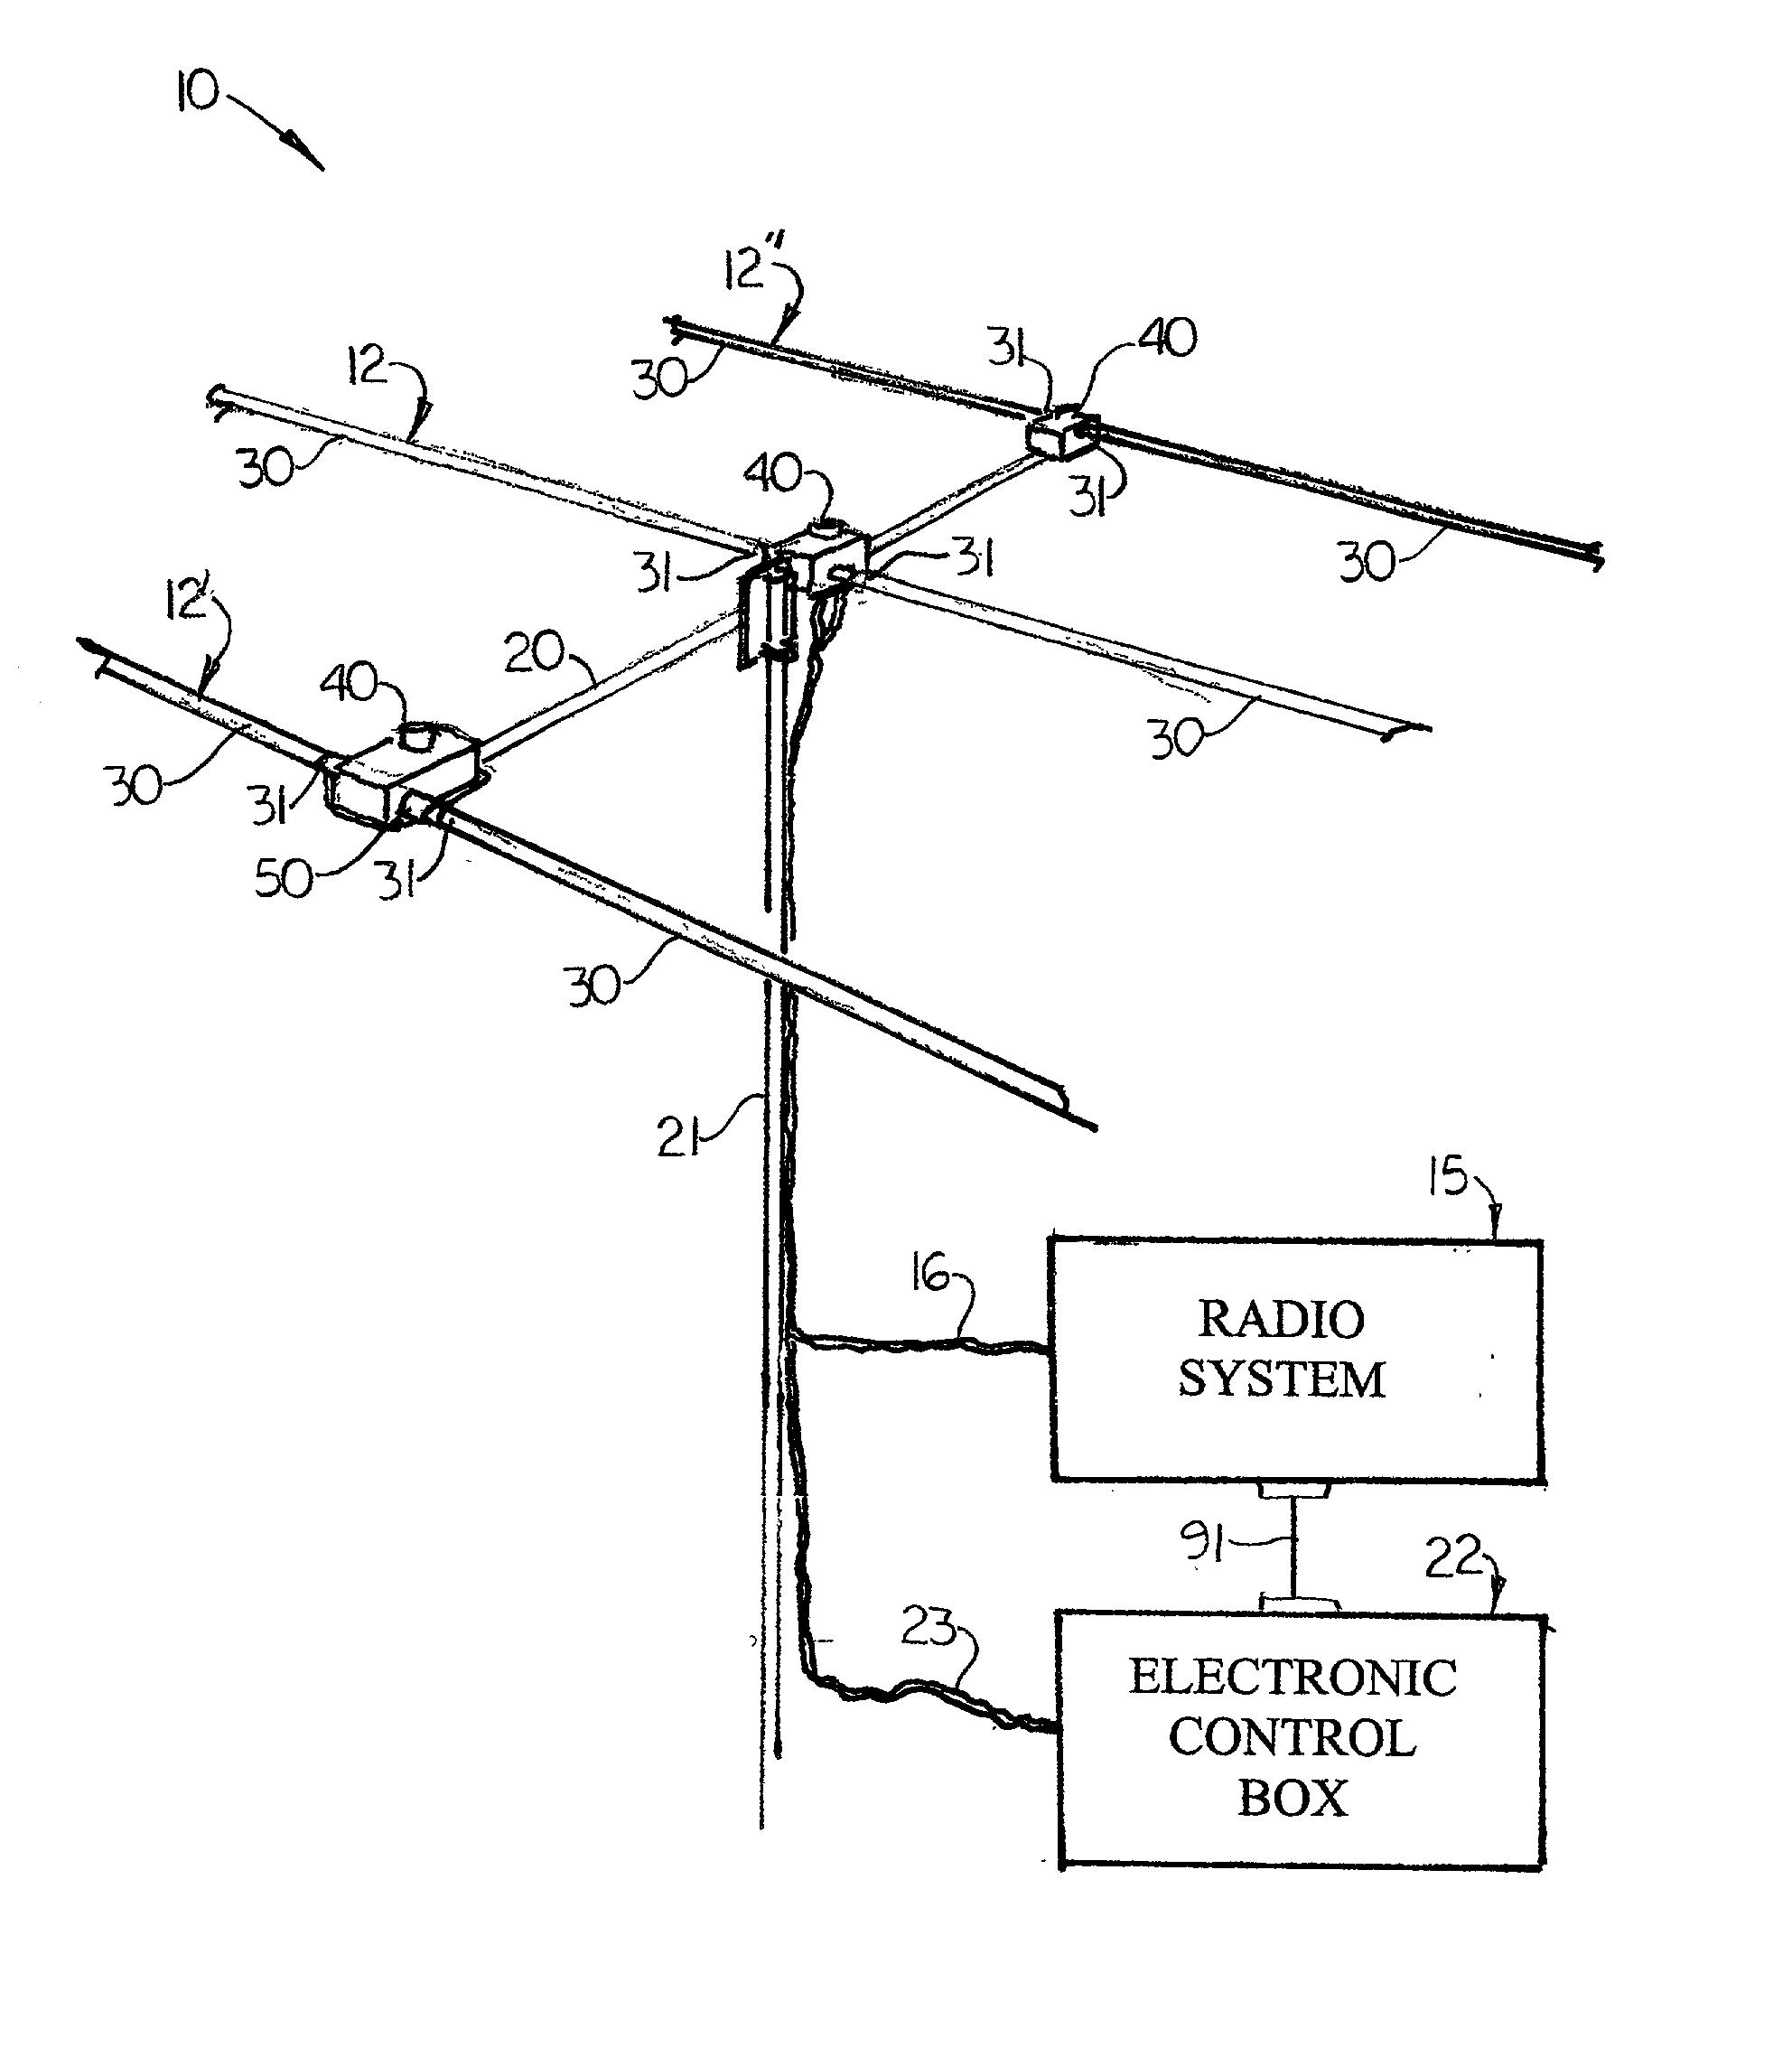 Tunable antenna system